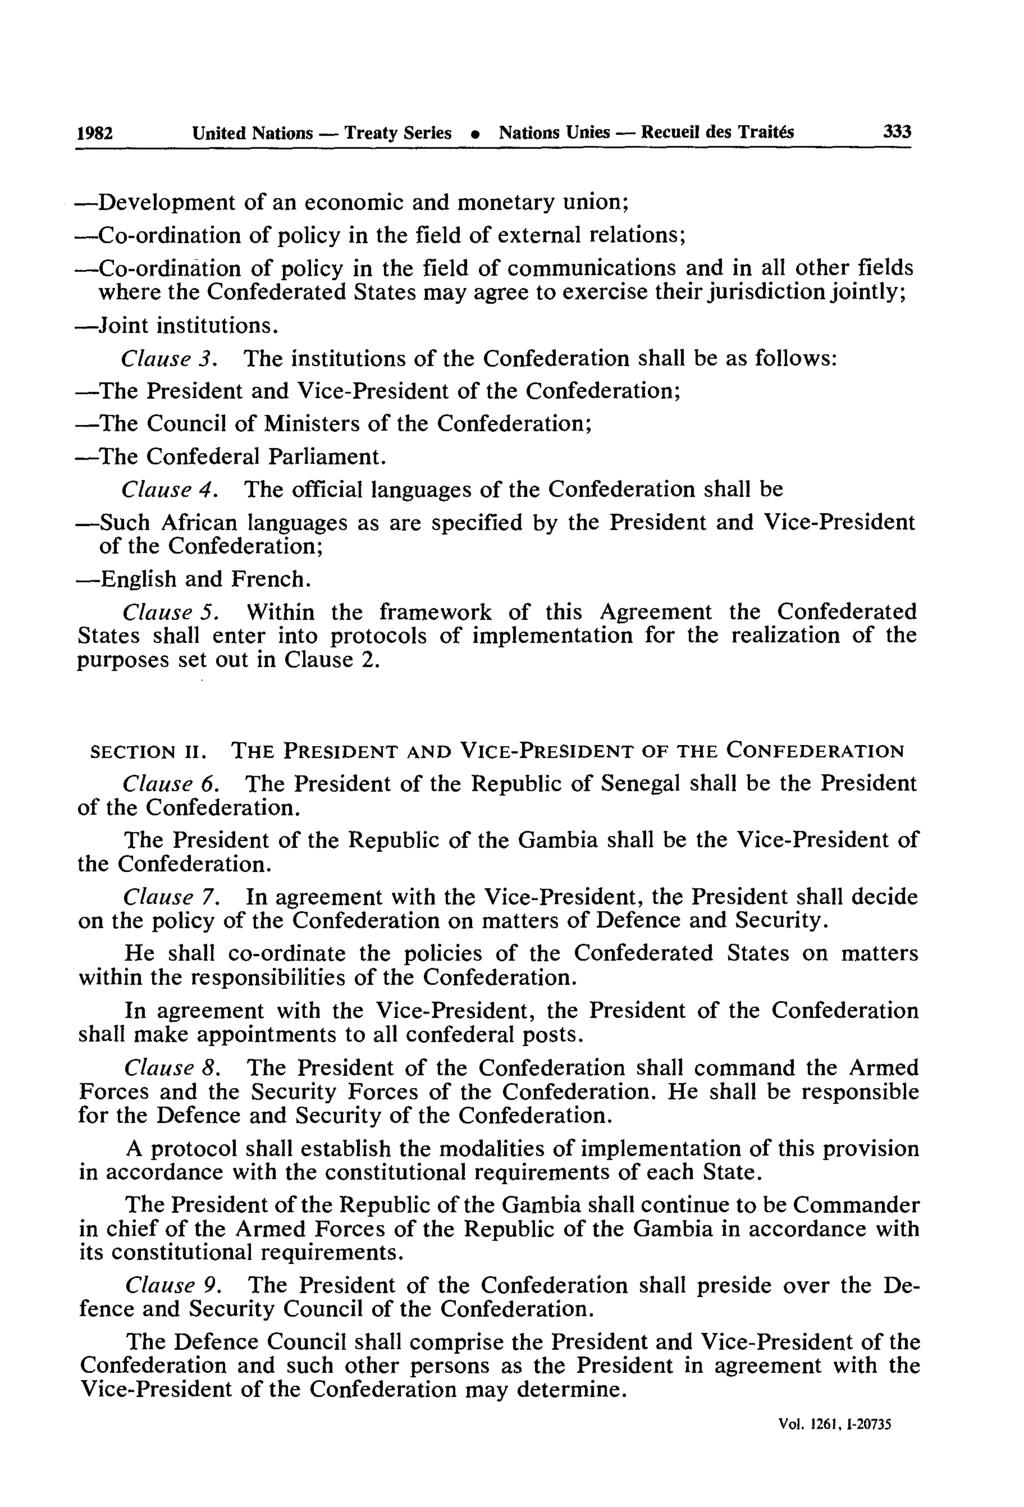 1982 United Nations Treaty Series Nations Unies Recueil des Traités 333 Development of an economic and monetary union; Co-ordination of policy in the field of external relations; Co-ordination of